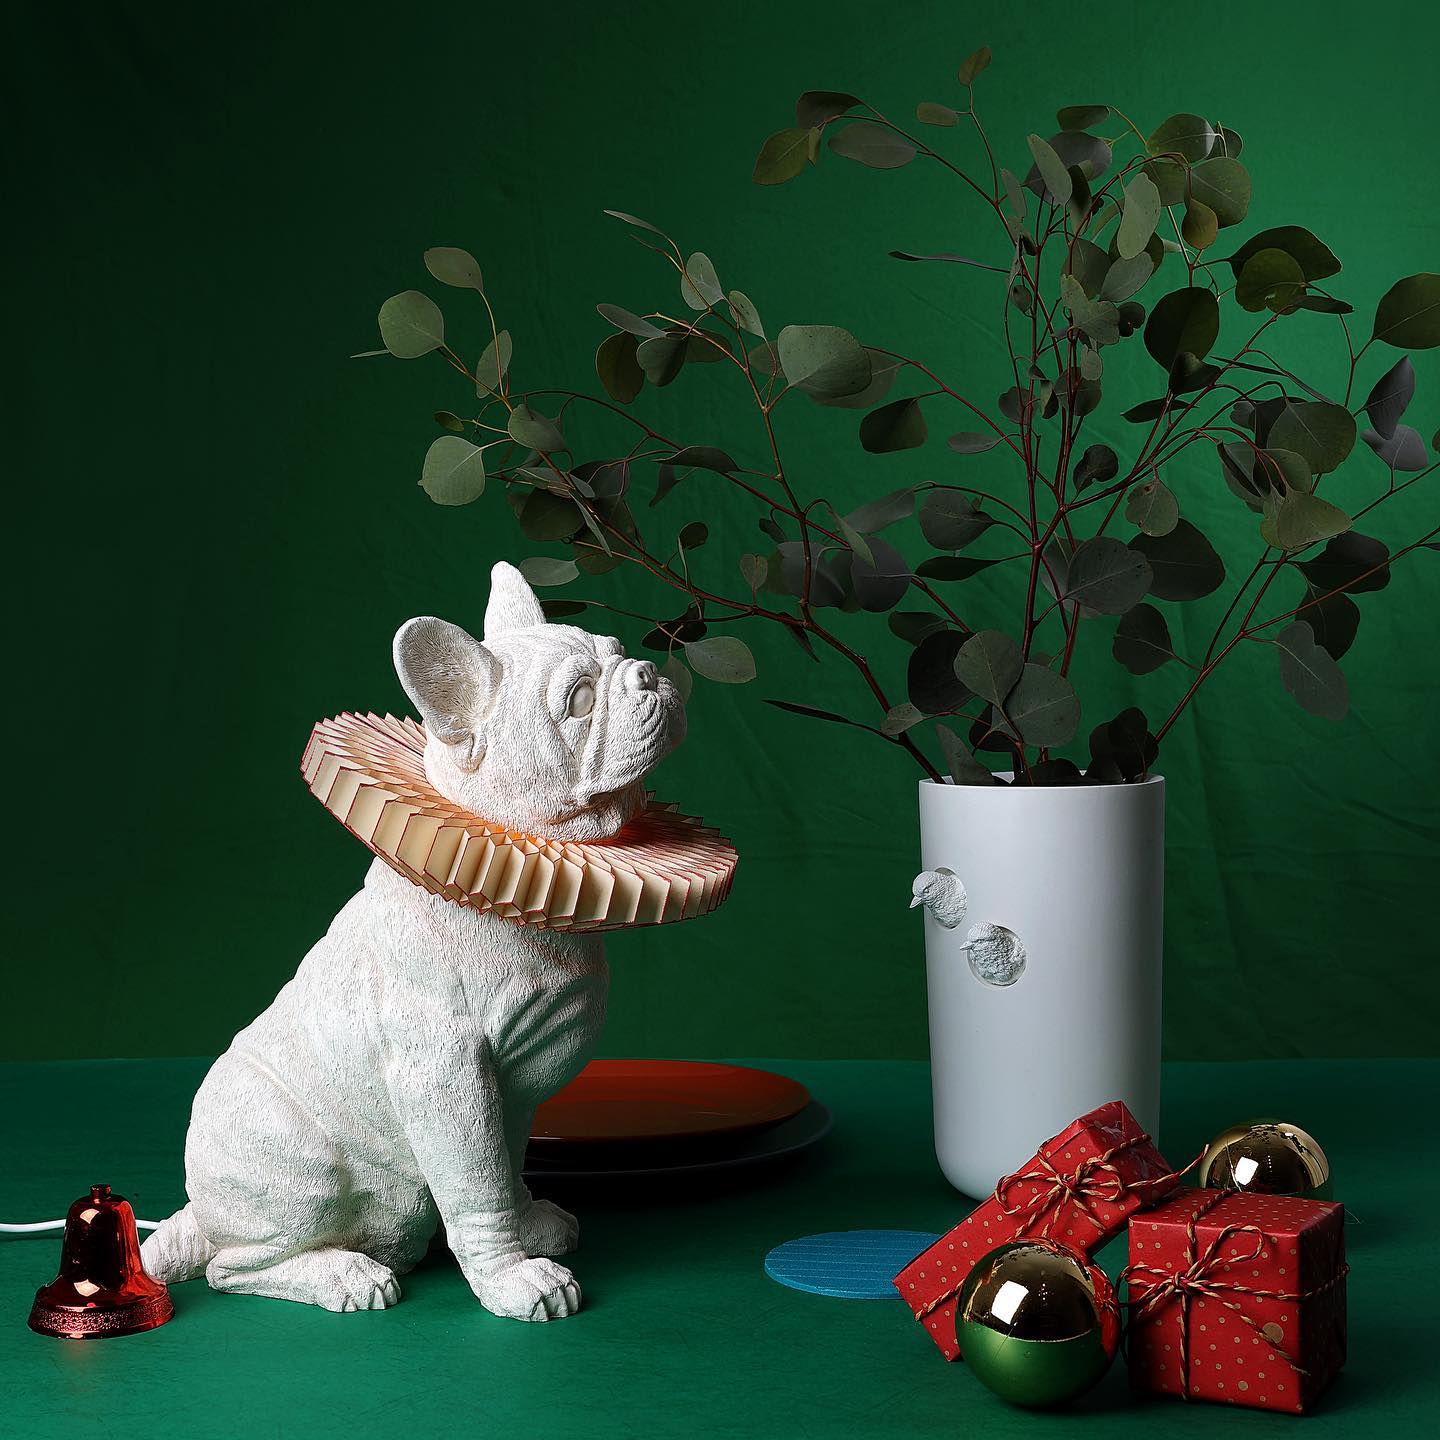 Now, Christmas decorations is unique with bulldog lamp & sculpture!